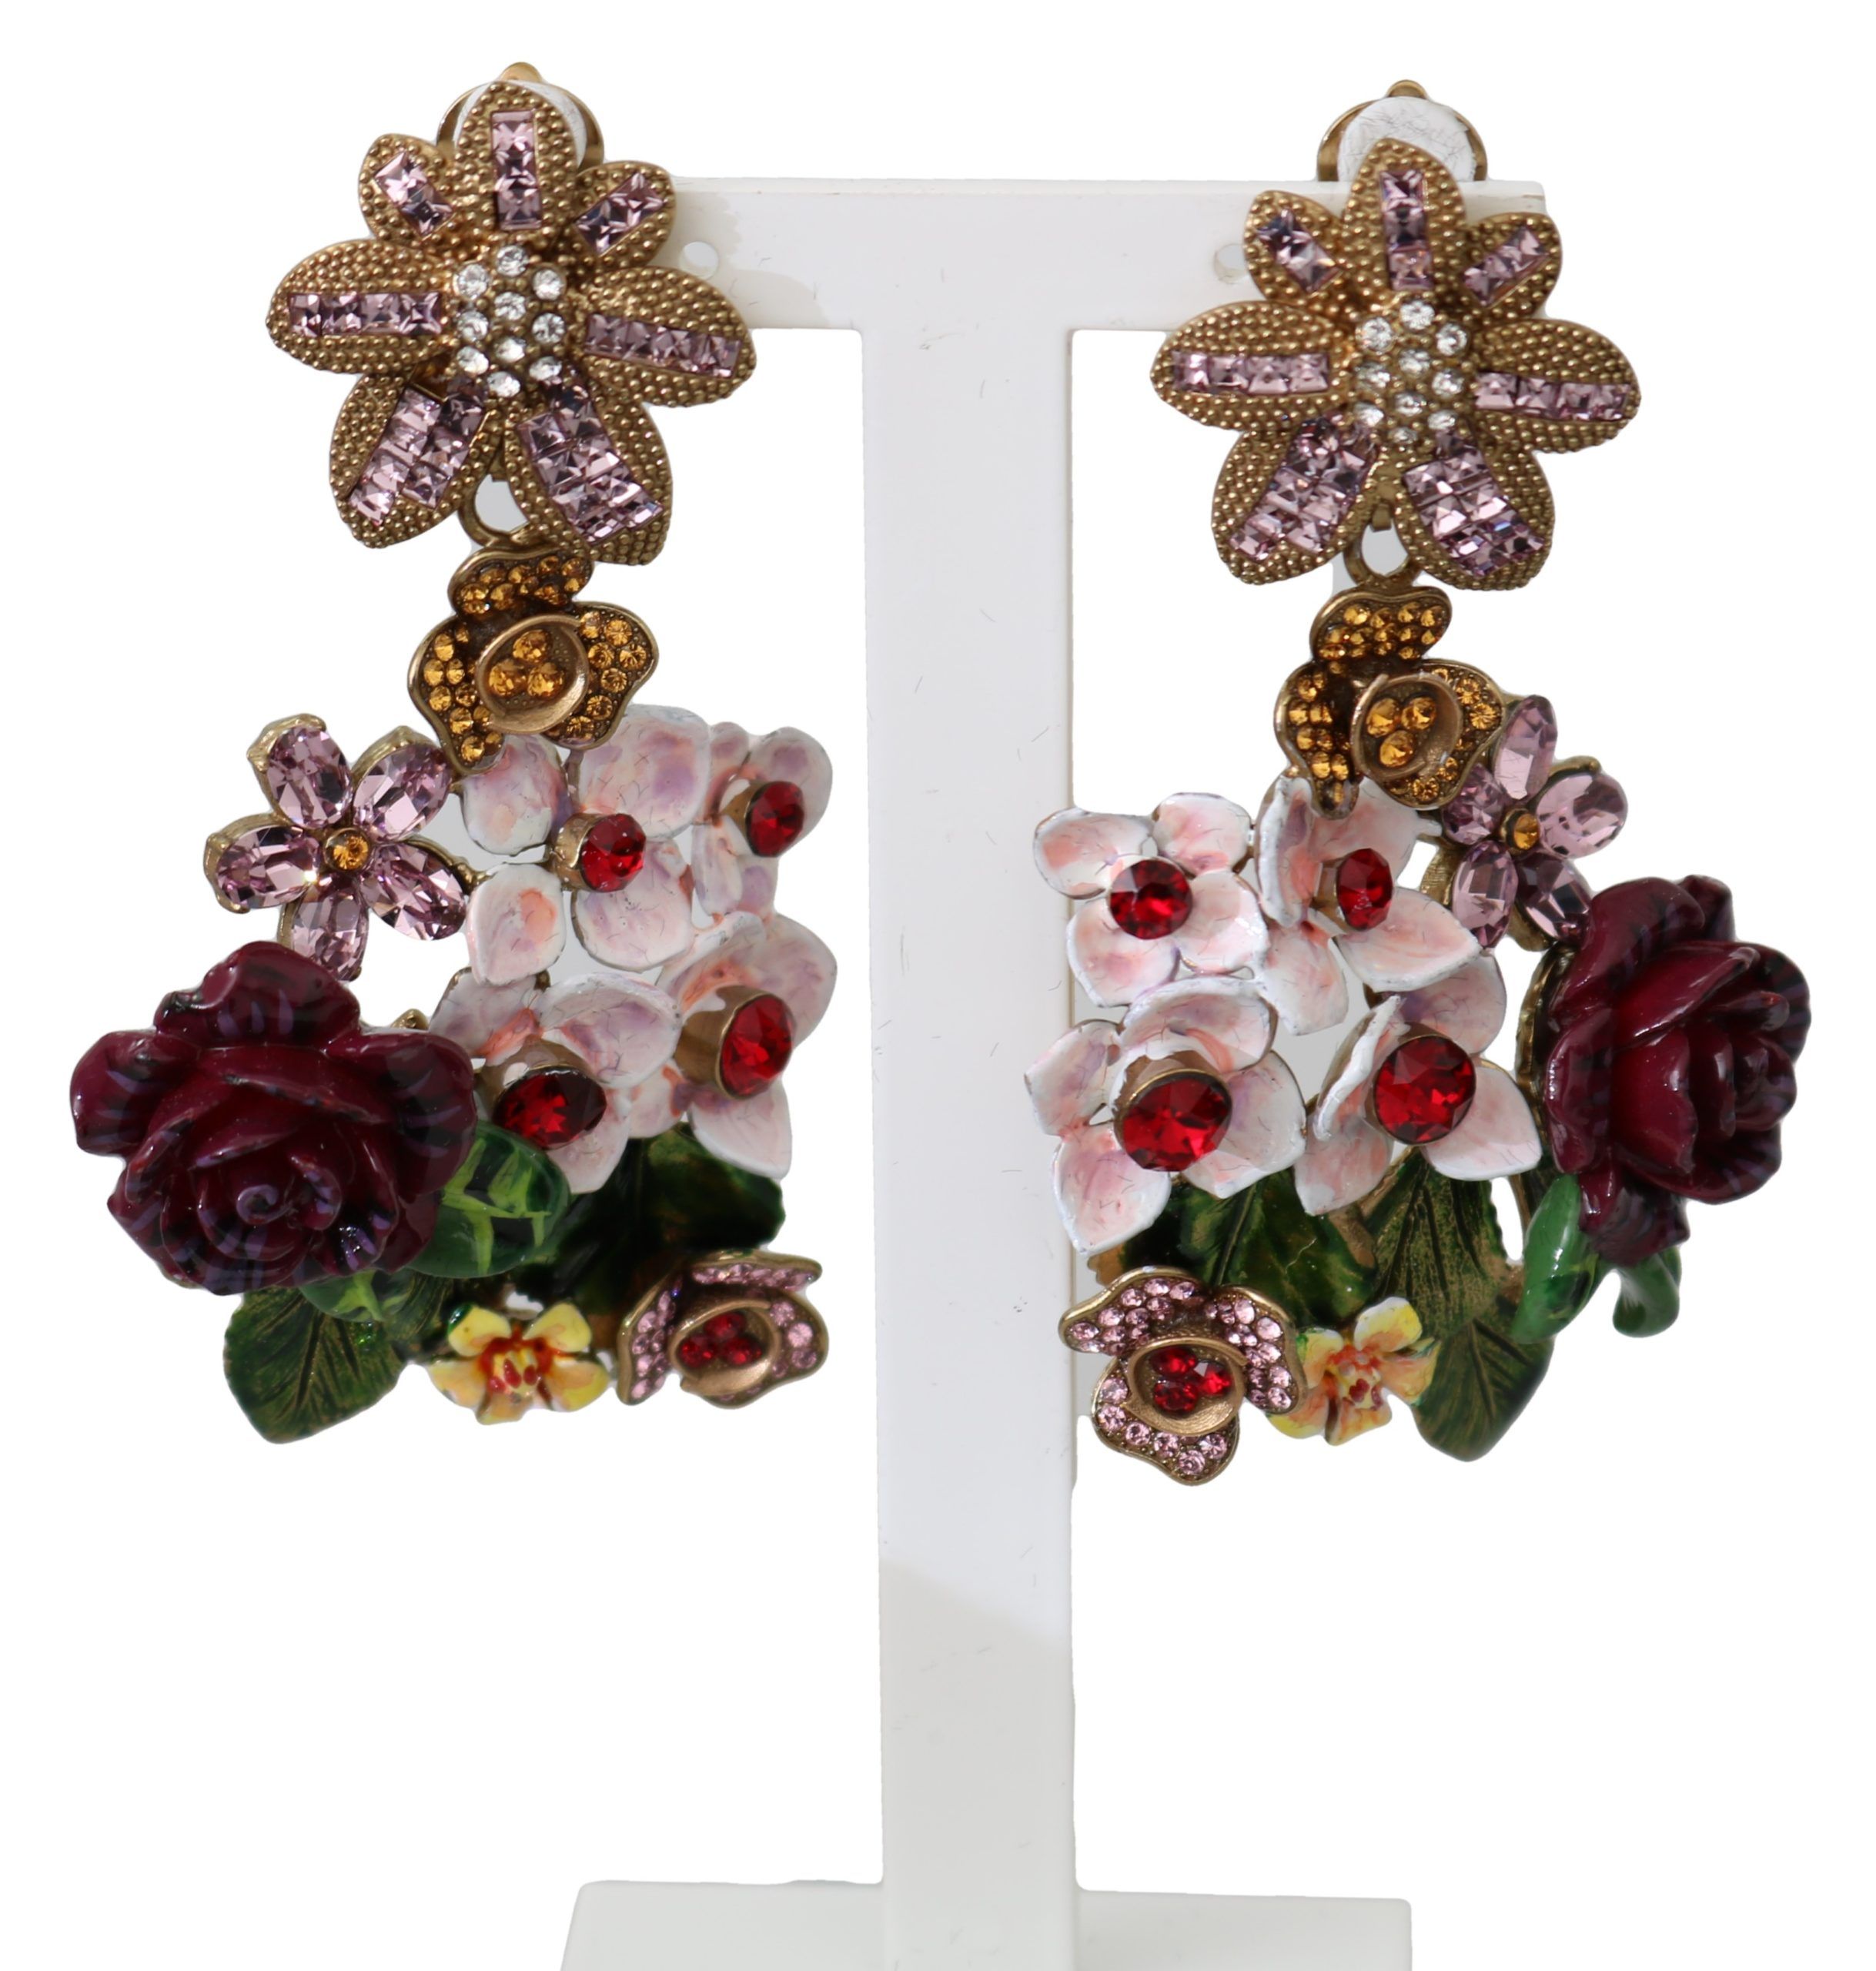 DOLCE & GABBANA
Gorgeous brand new with tags, 100% Authentic Dolce & Gabbana earrings.
Model: Clip-on, angling
Motive: FIORI BOUQUET, flowers
Material: 60% Brass, 20% glass, 20% crystals
Color: Gold, white, green
Crystals: Purple, red, gold
Logo details
Made in Italy

Length: 7 cm